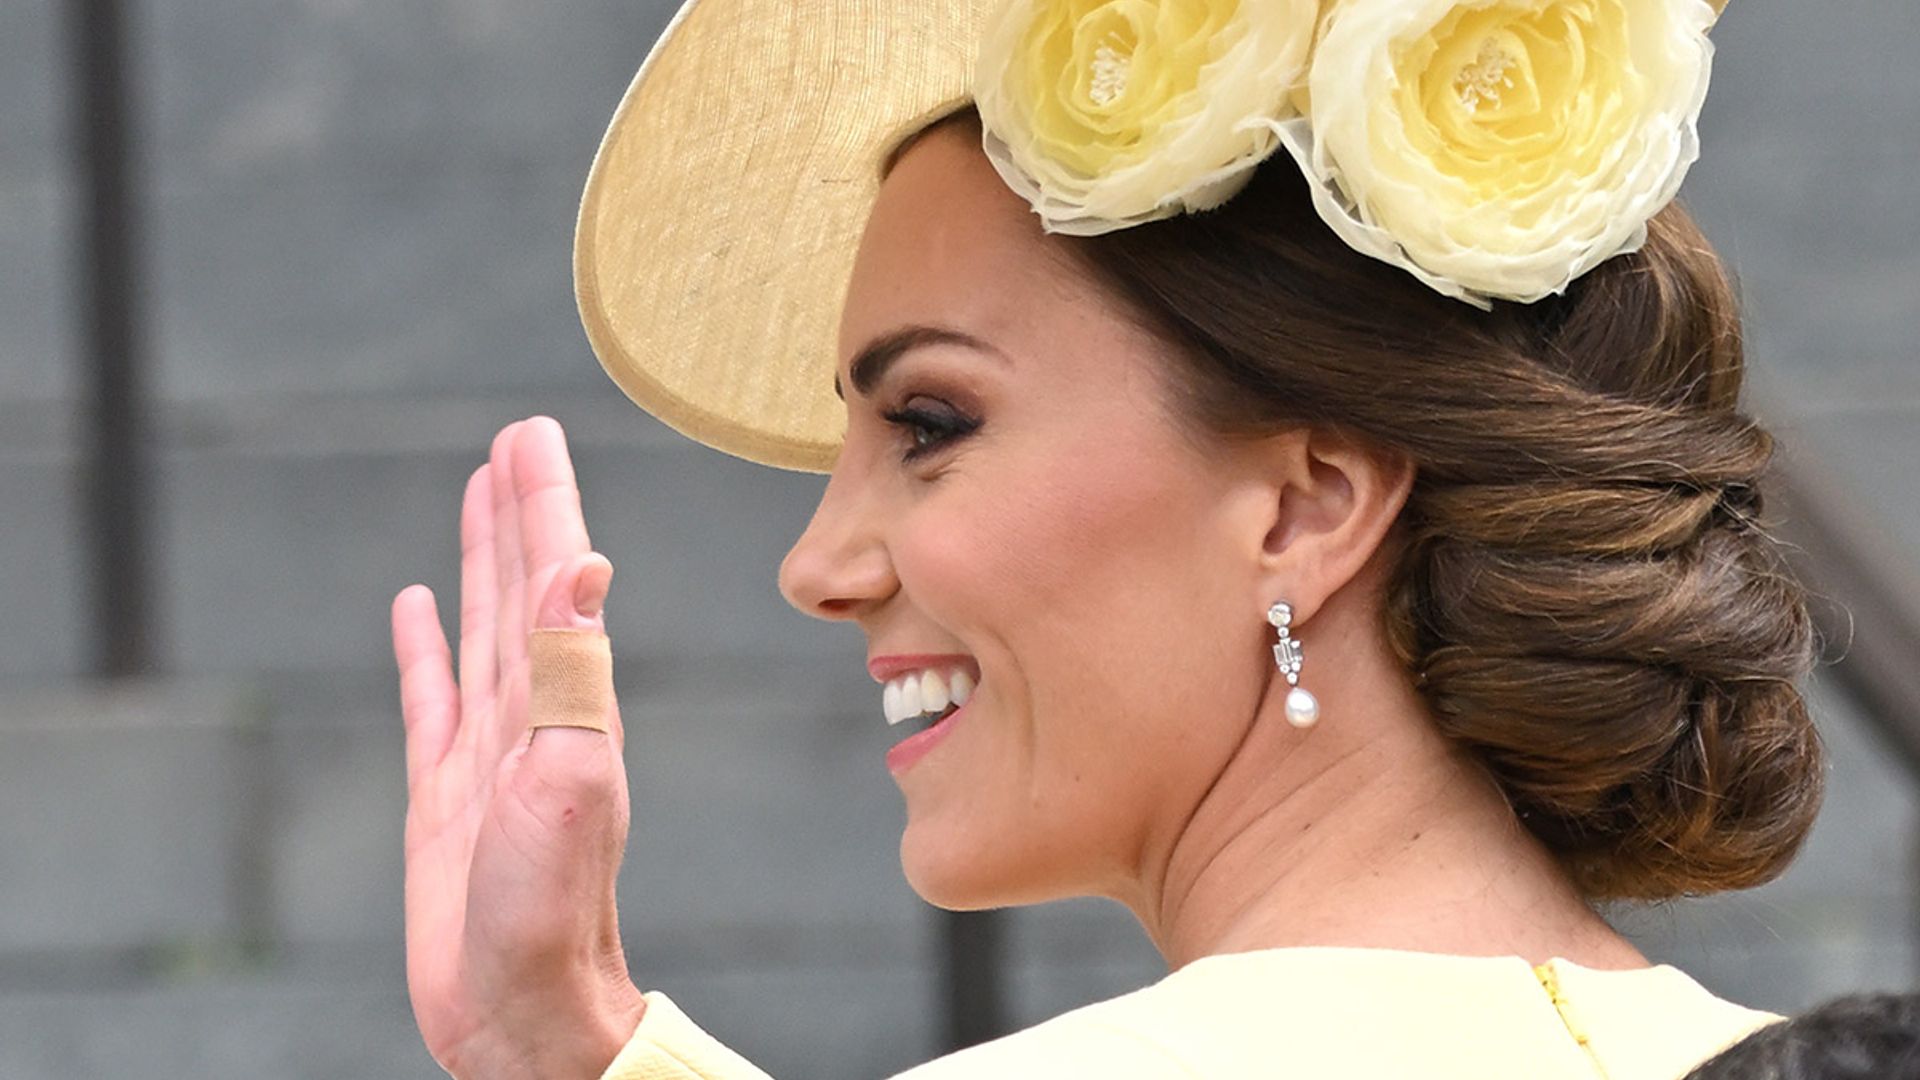 Kate Middleton's high heel collection has a sassy revamp - did you notice?